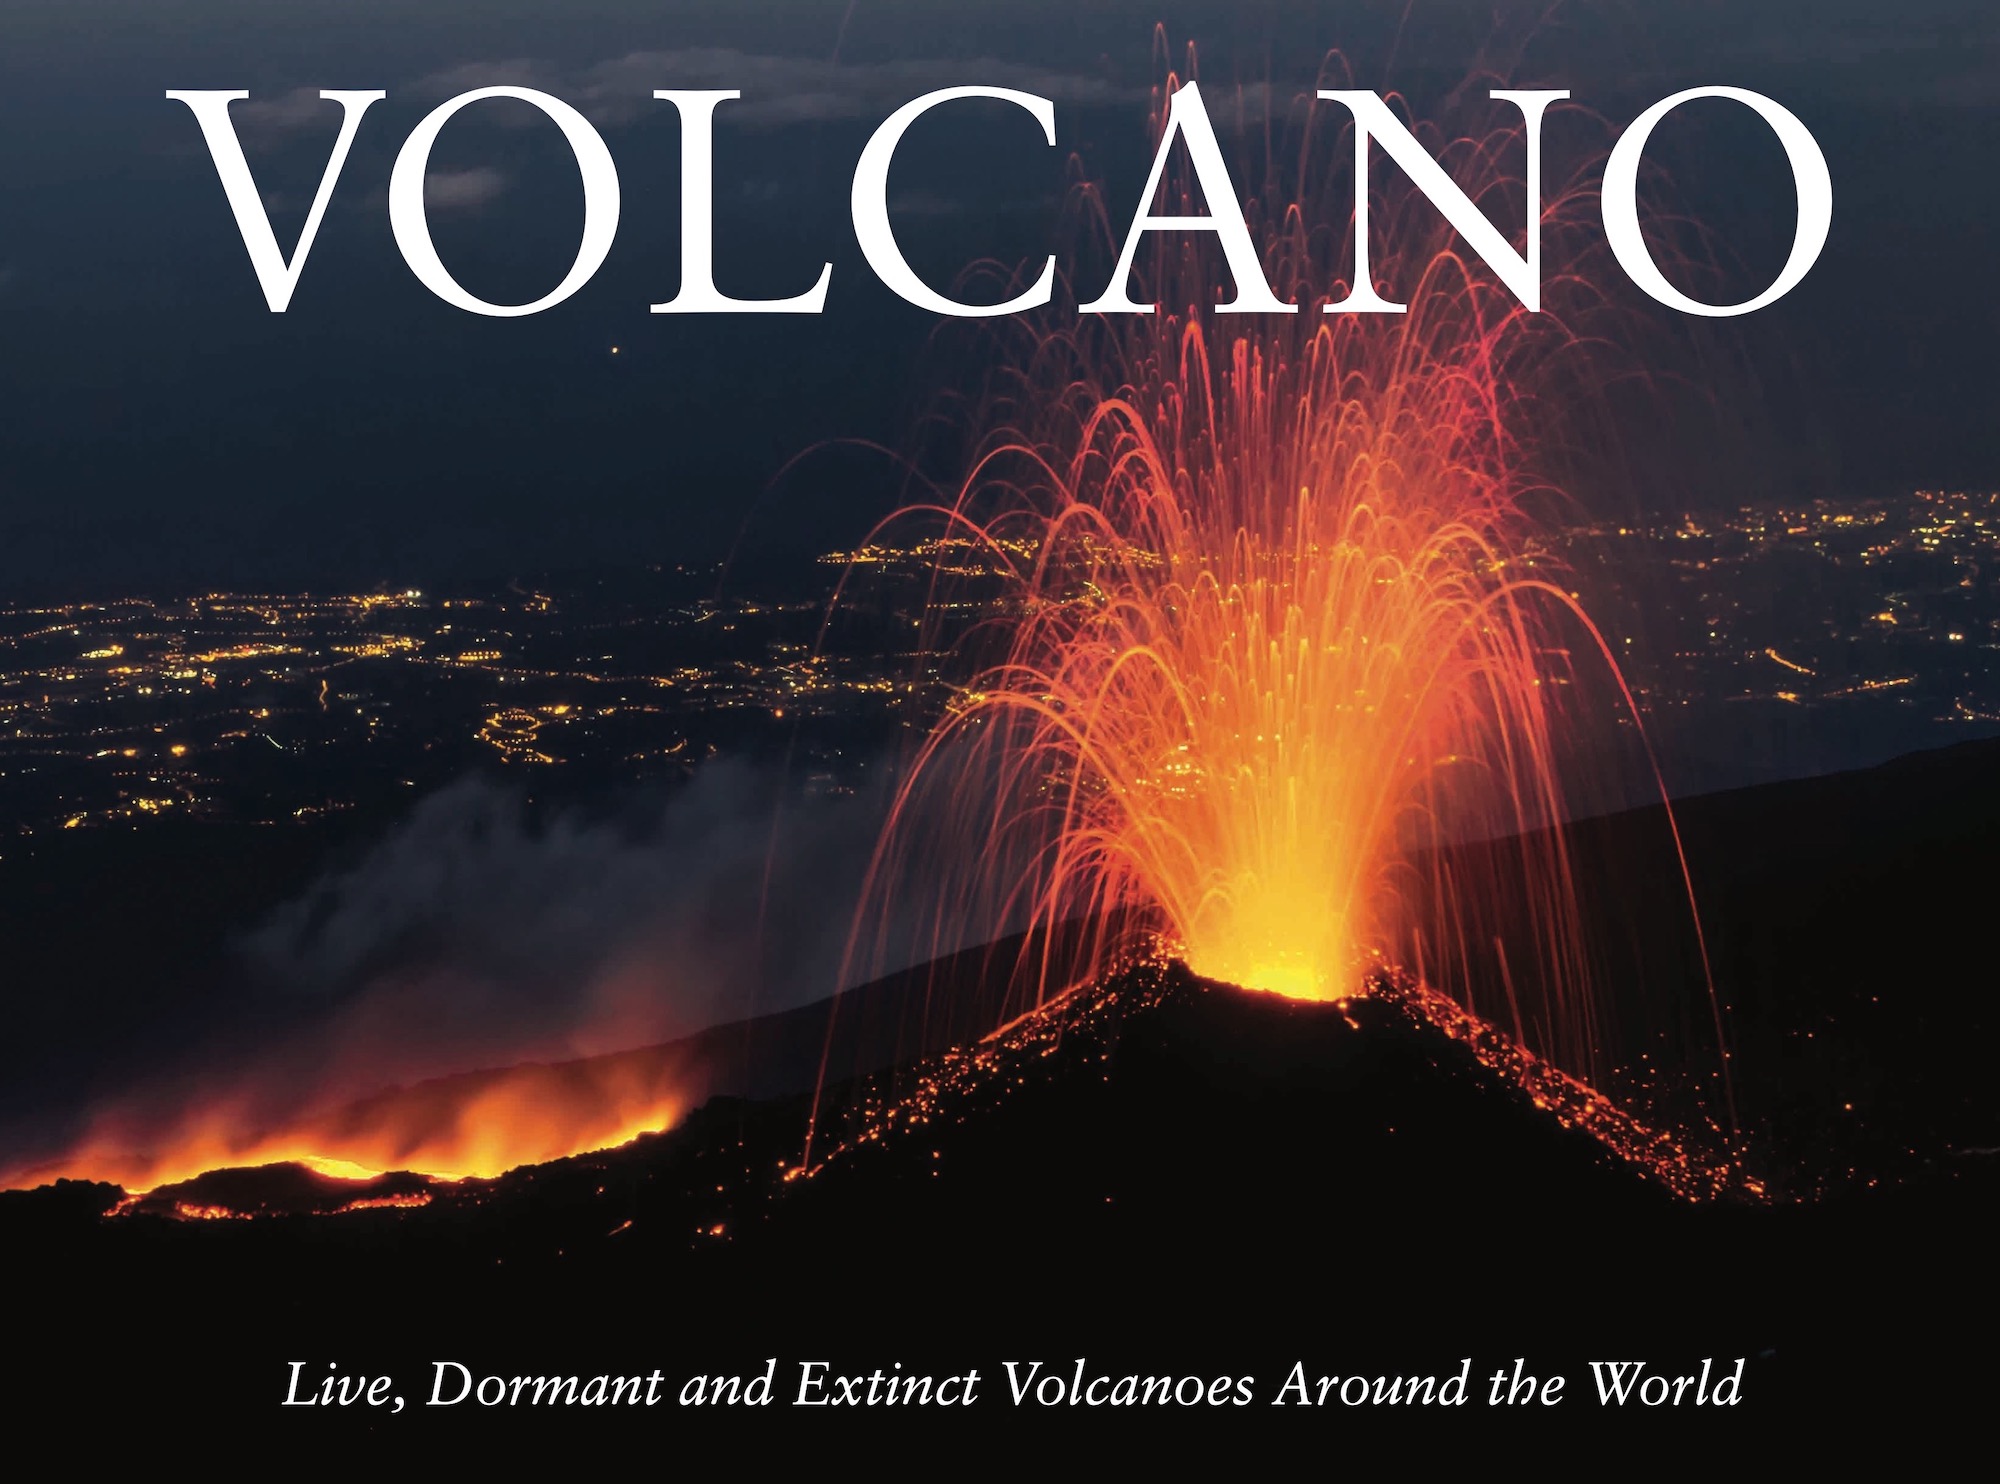 Volcano: Wonders Of Our Planet series